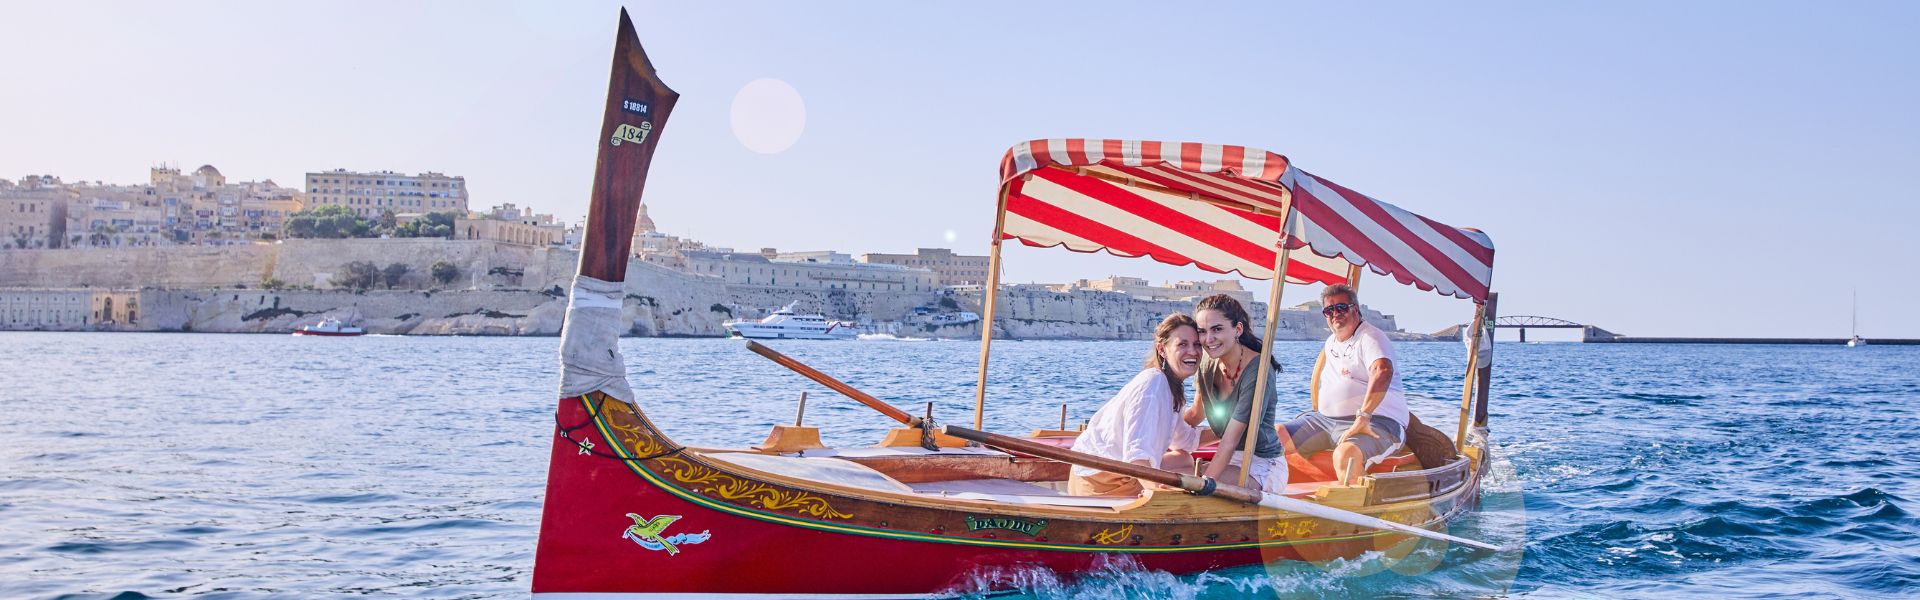 Malta Campaign page banner couple boat 02May23 (2)